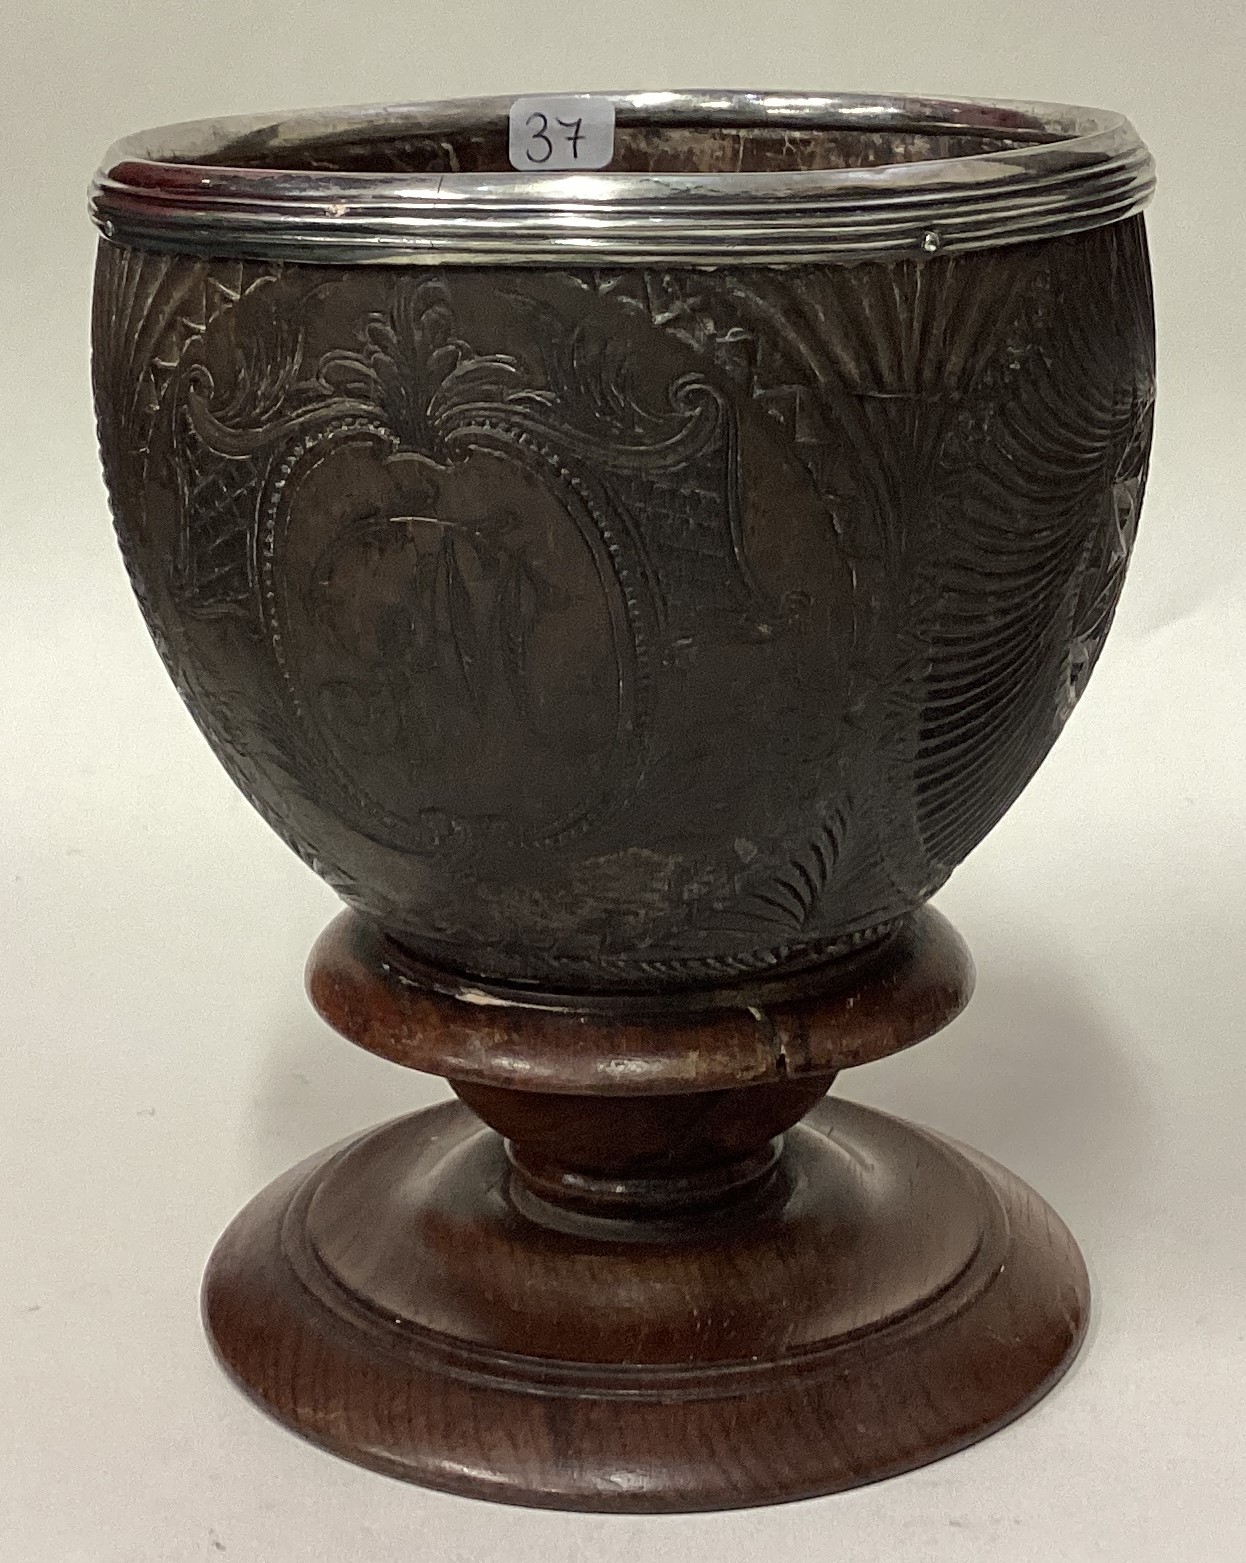 An 18th Century Scottish silver mounted coconut cup. Circa 1770.